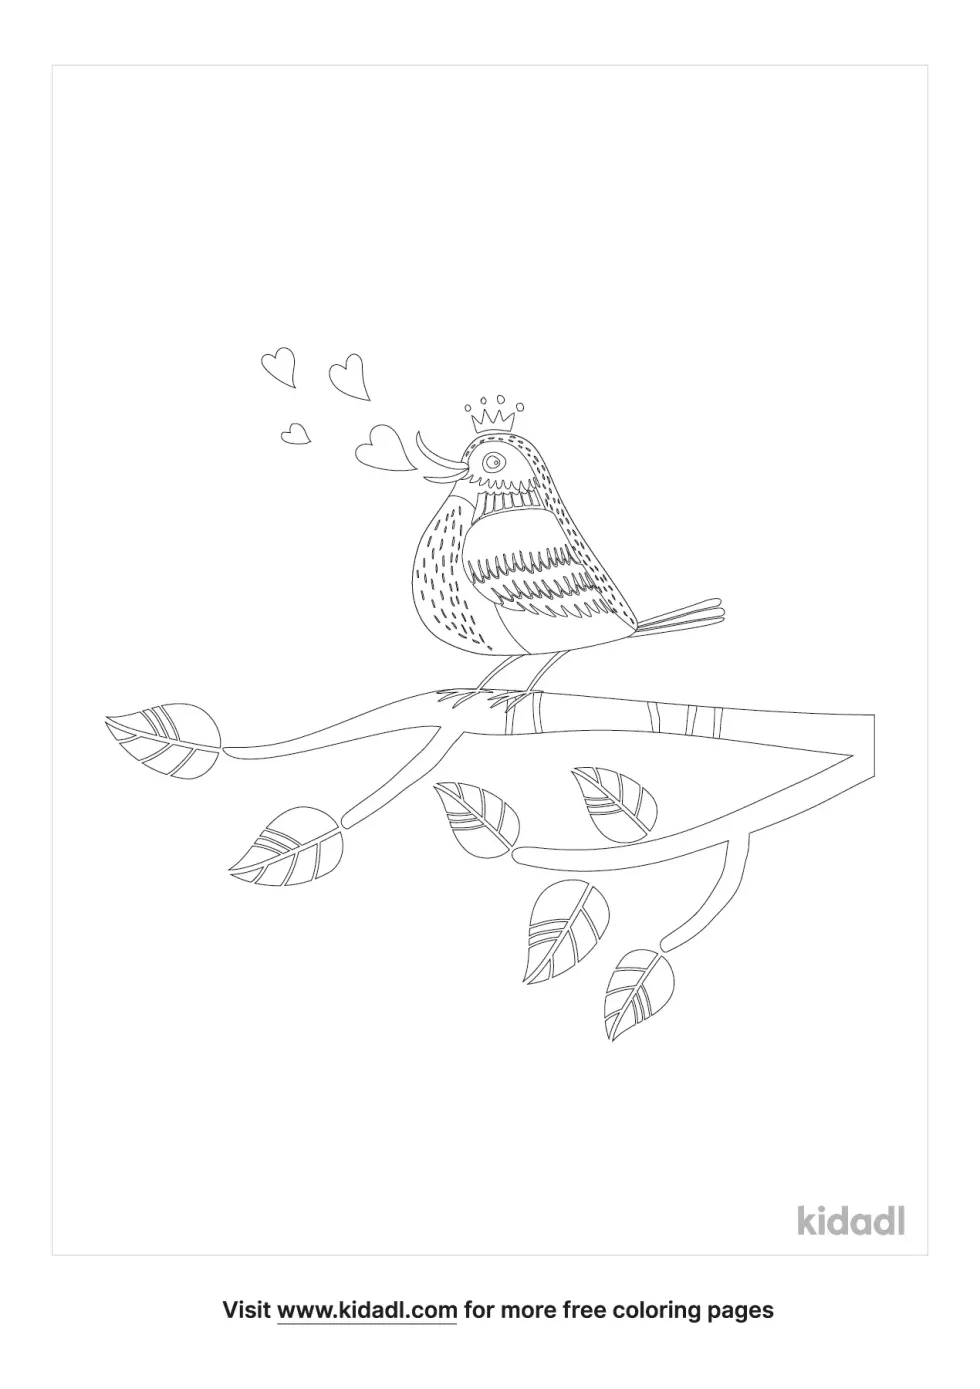 Bird Art Coloring Page